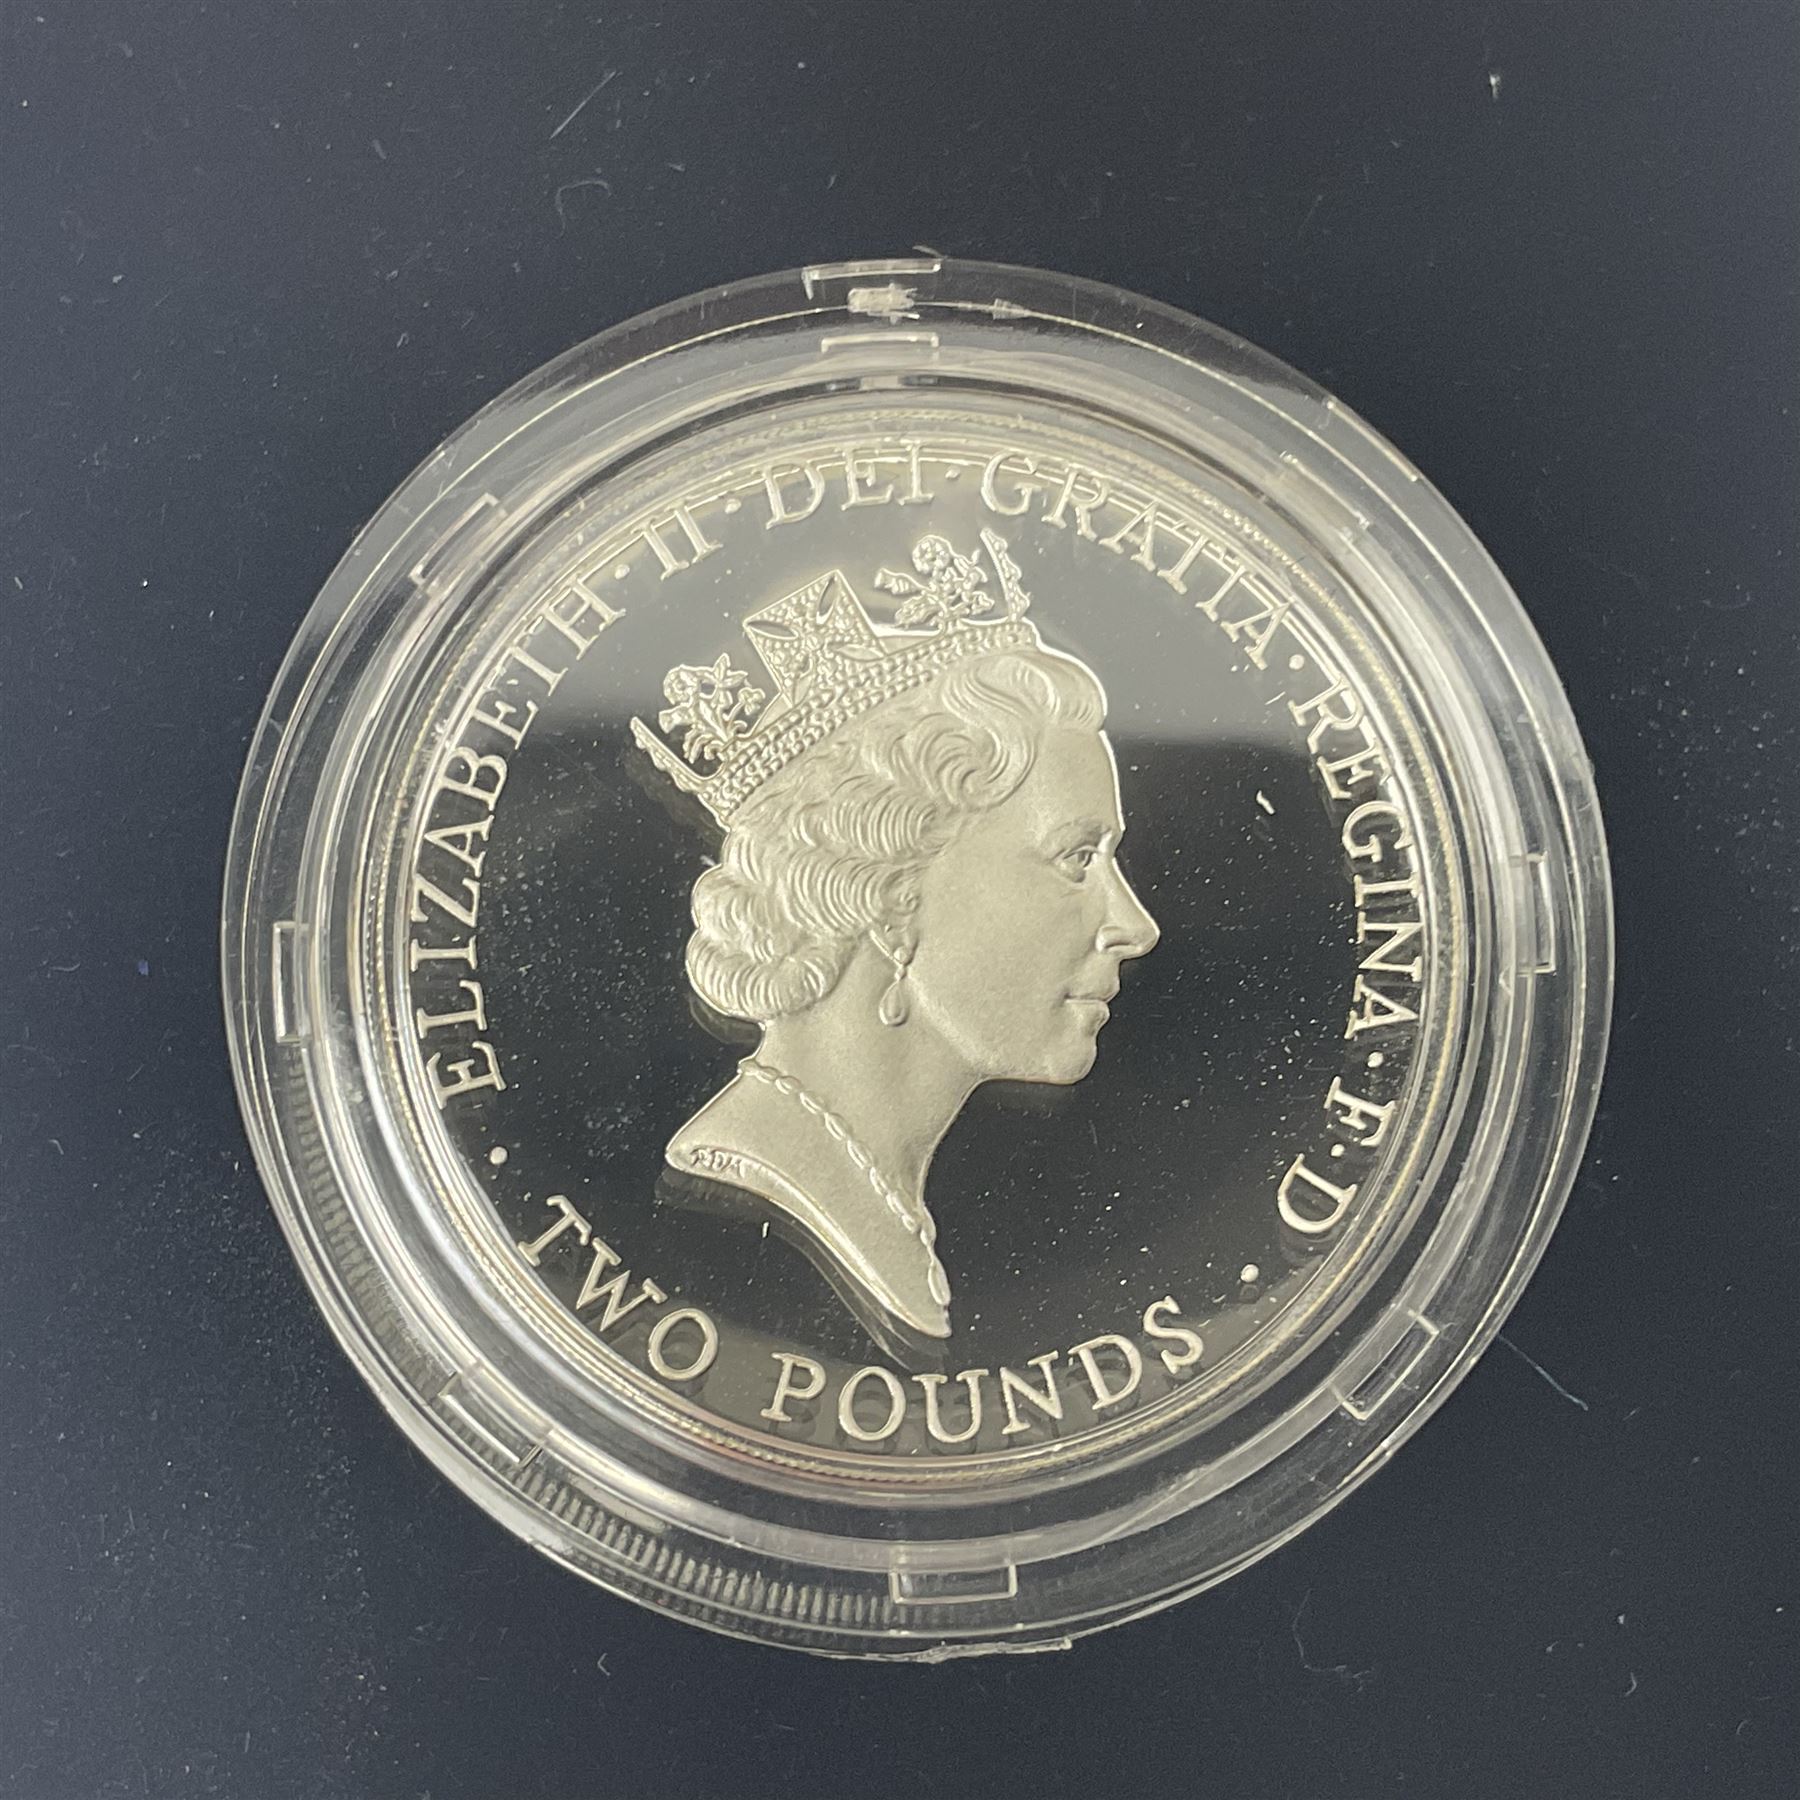 The Royal Mint United Kingdom 1996 'A Celebration of Football' silver proof piedfort two pound coin - Image 4 of 7